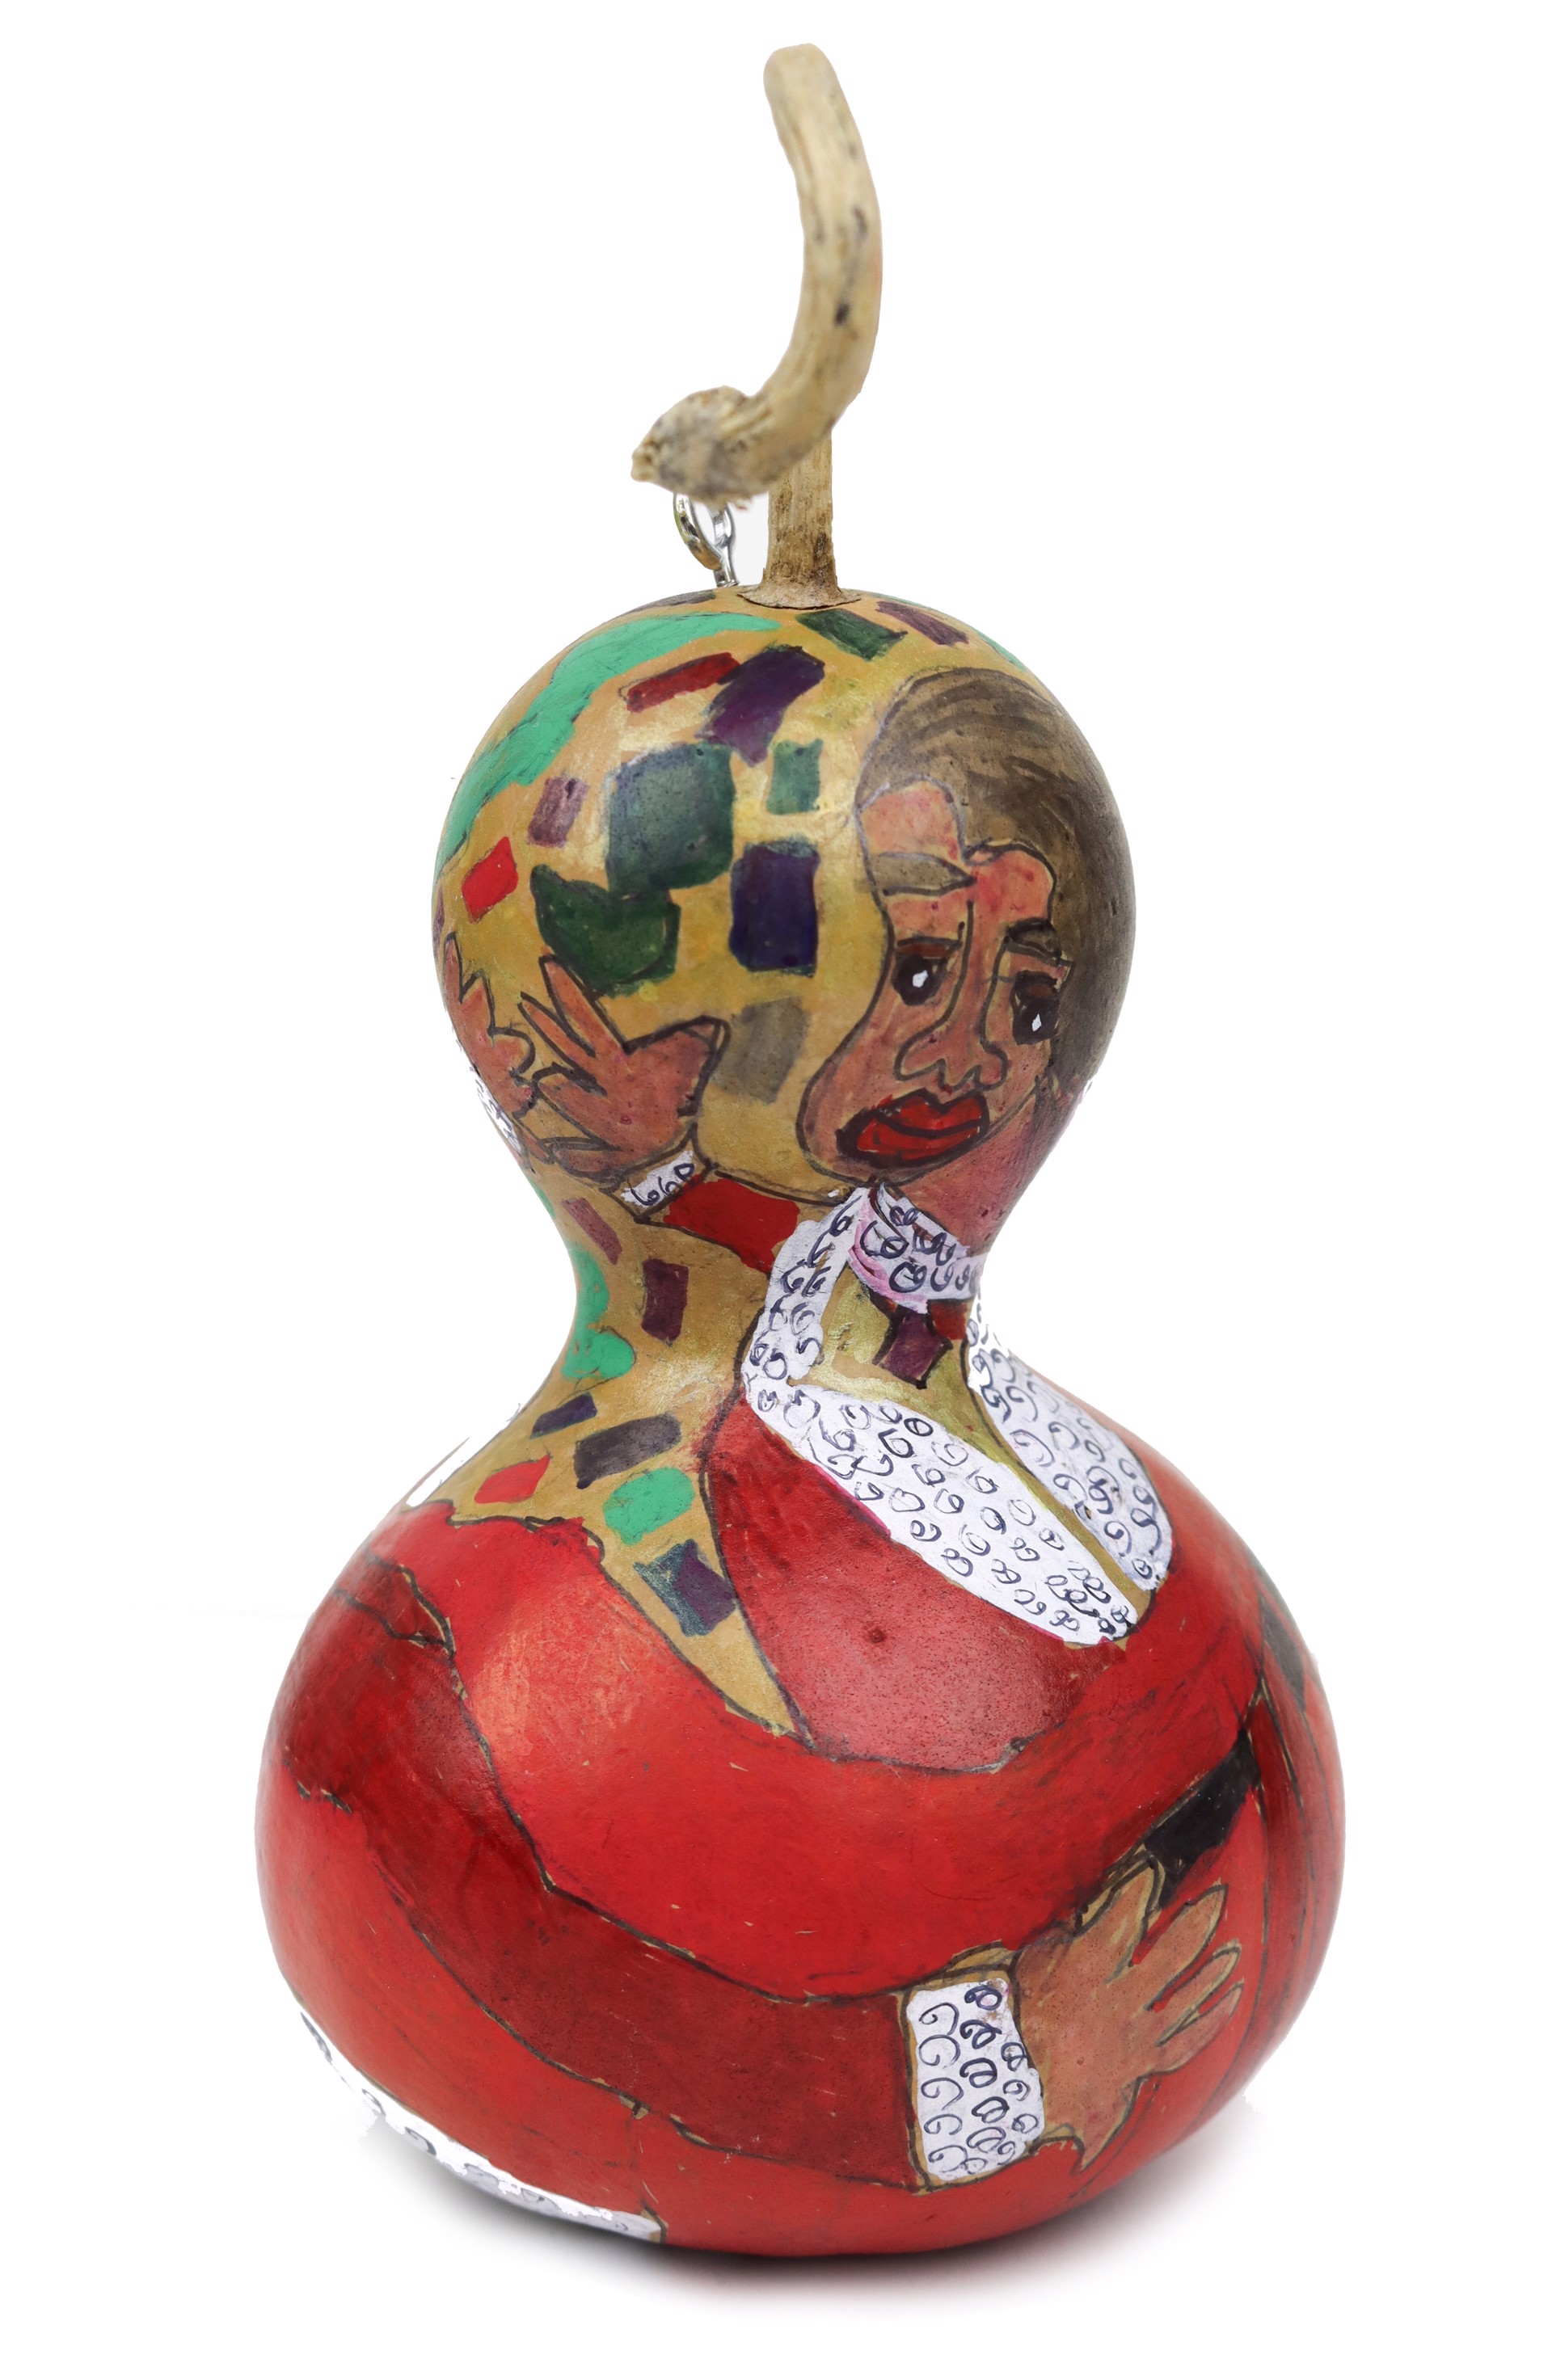 Clause Love (gourd ornament) by Vanessa Monroe